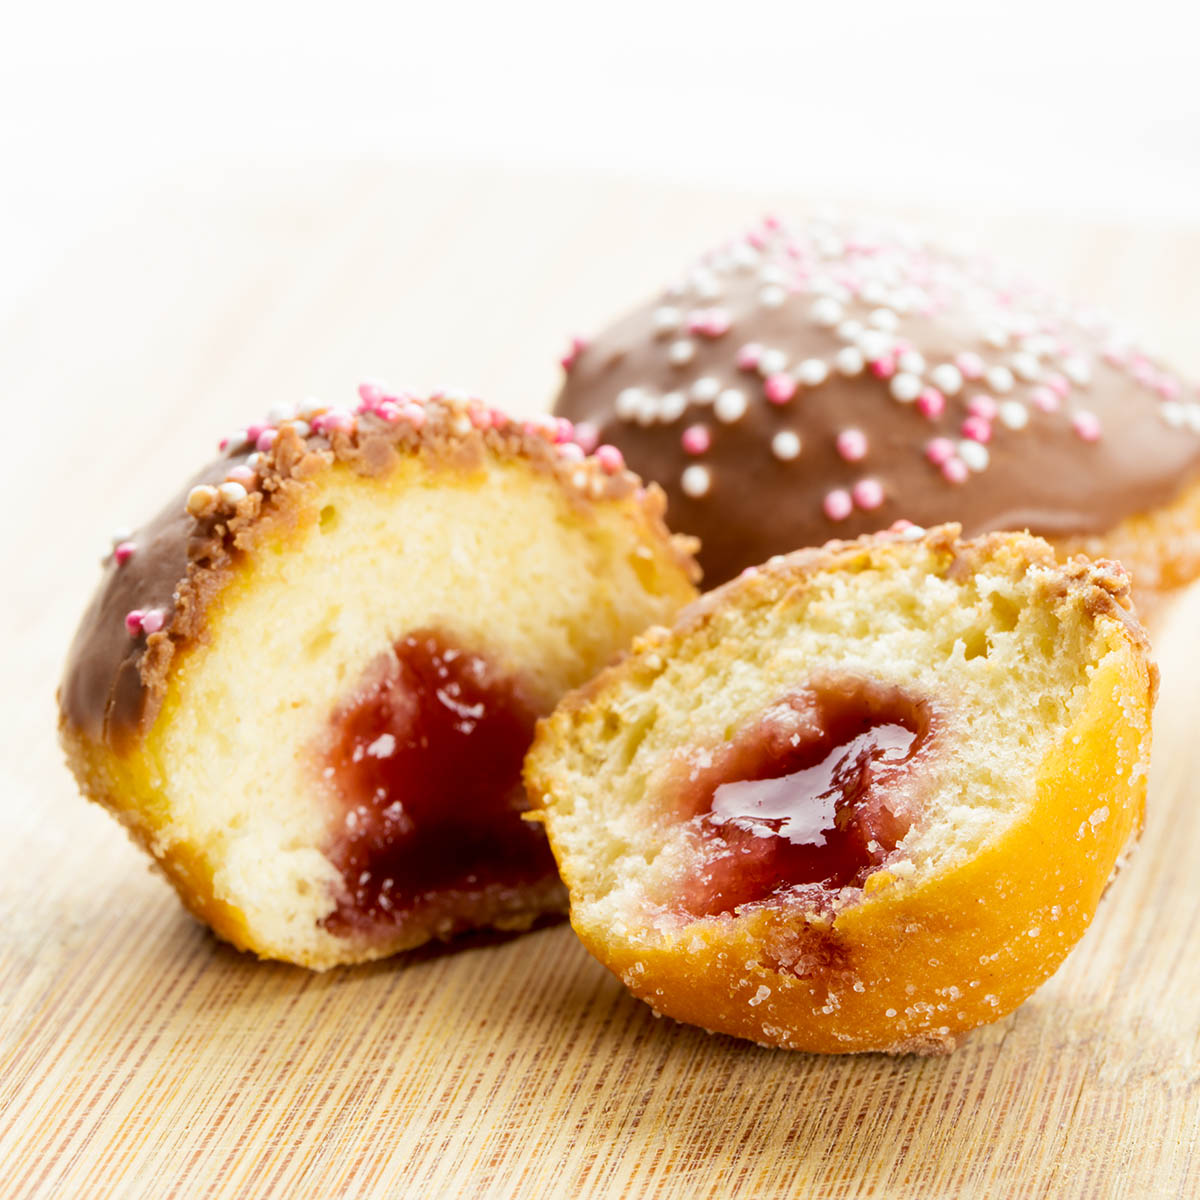 Stockfoto - Donut holes with chocolate and jam